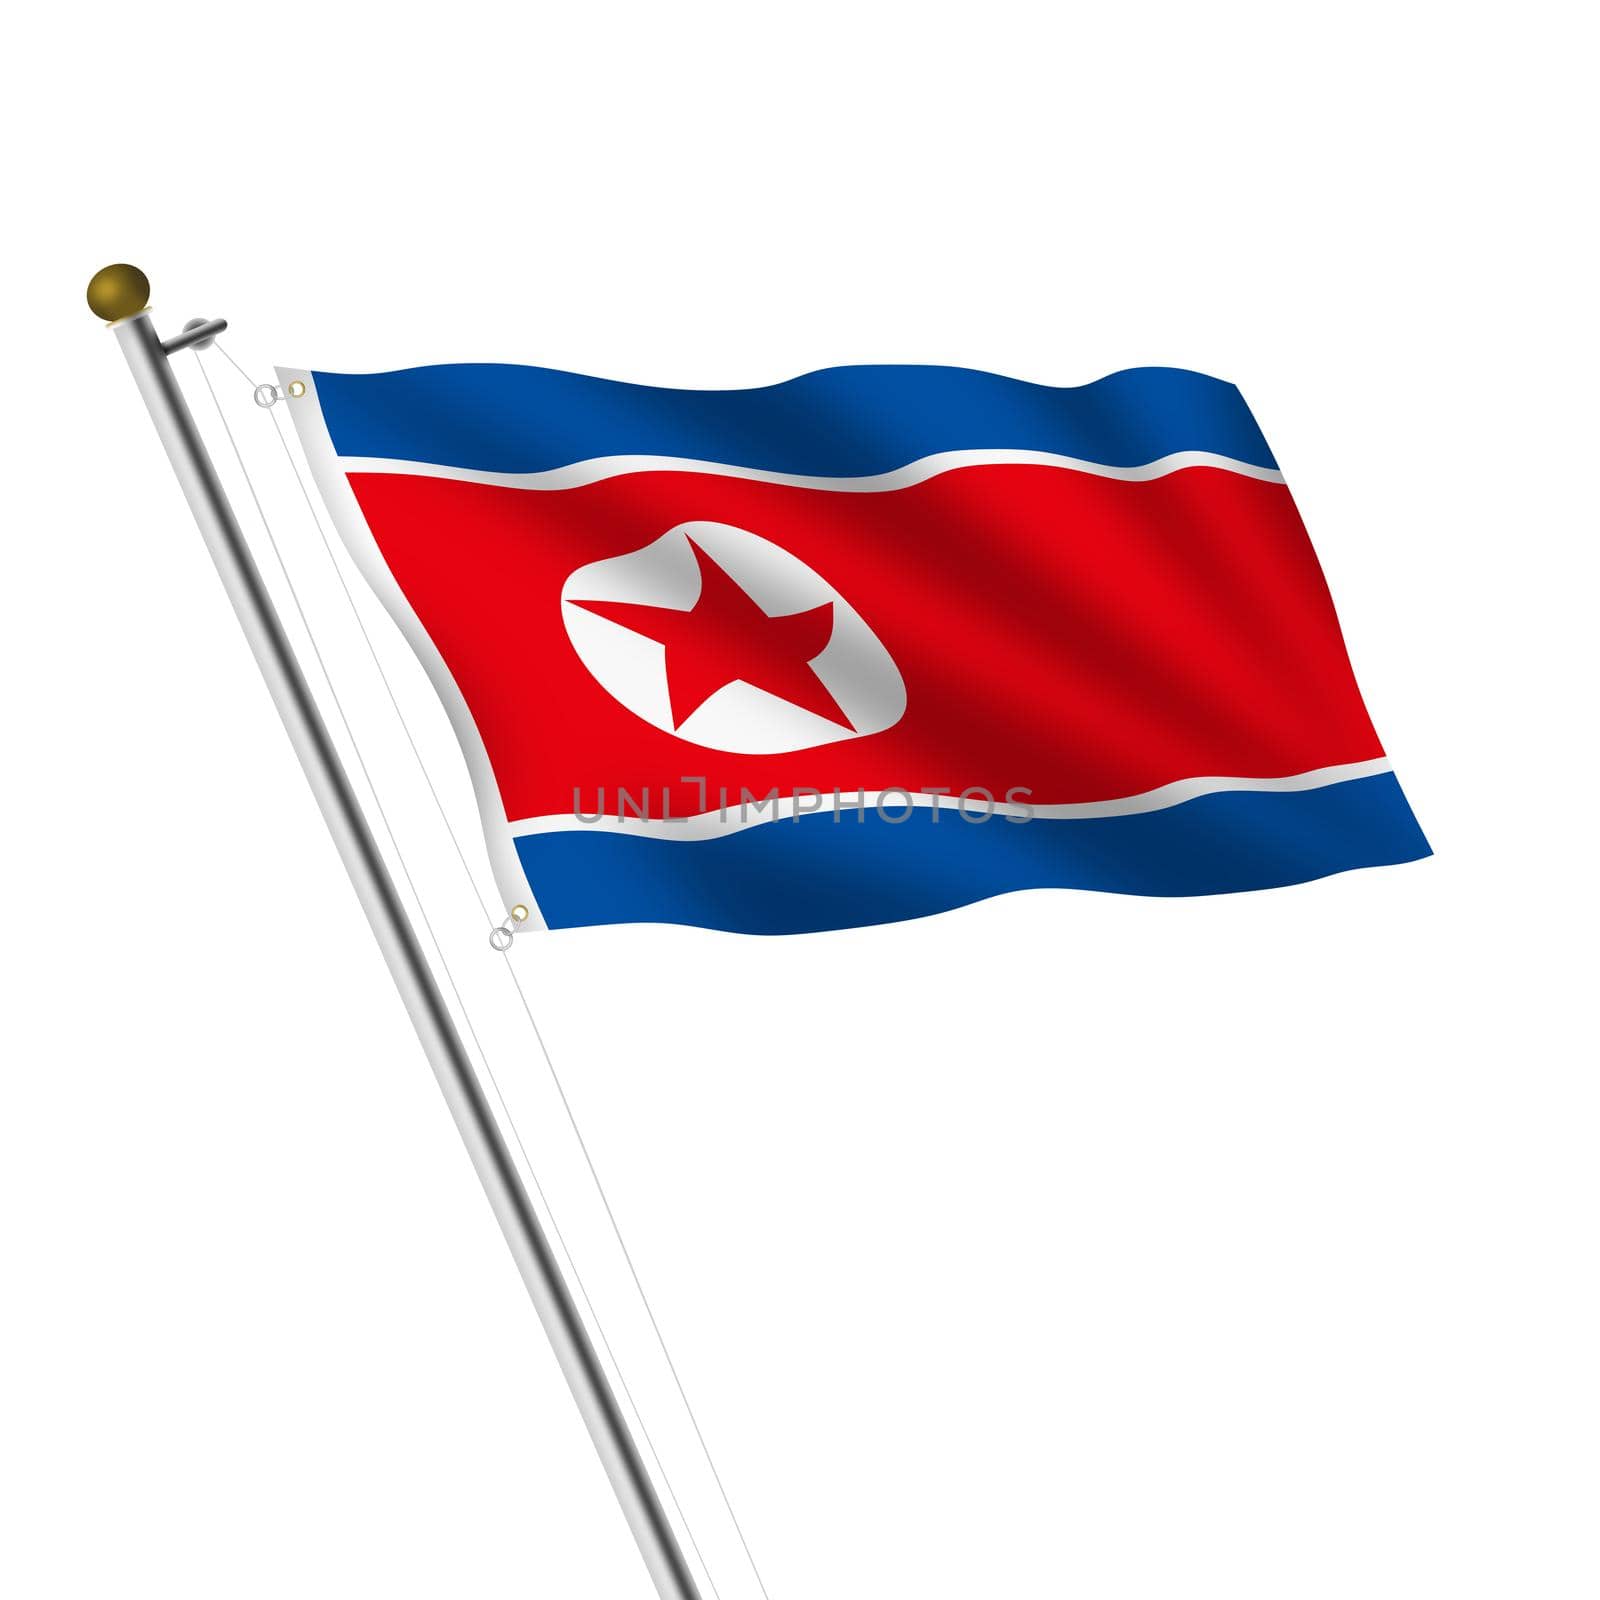 A North Korea flagpole 3d illustration on white with clipping path